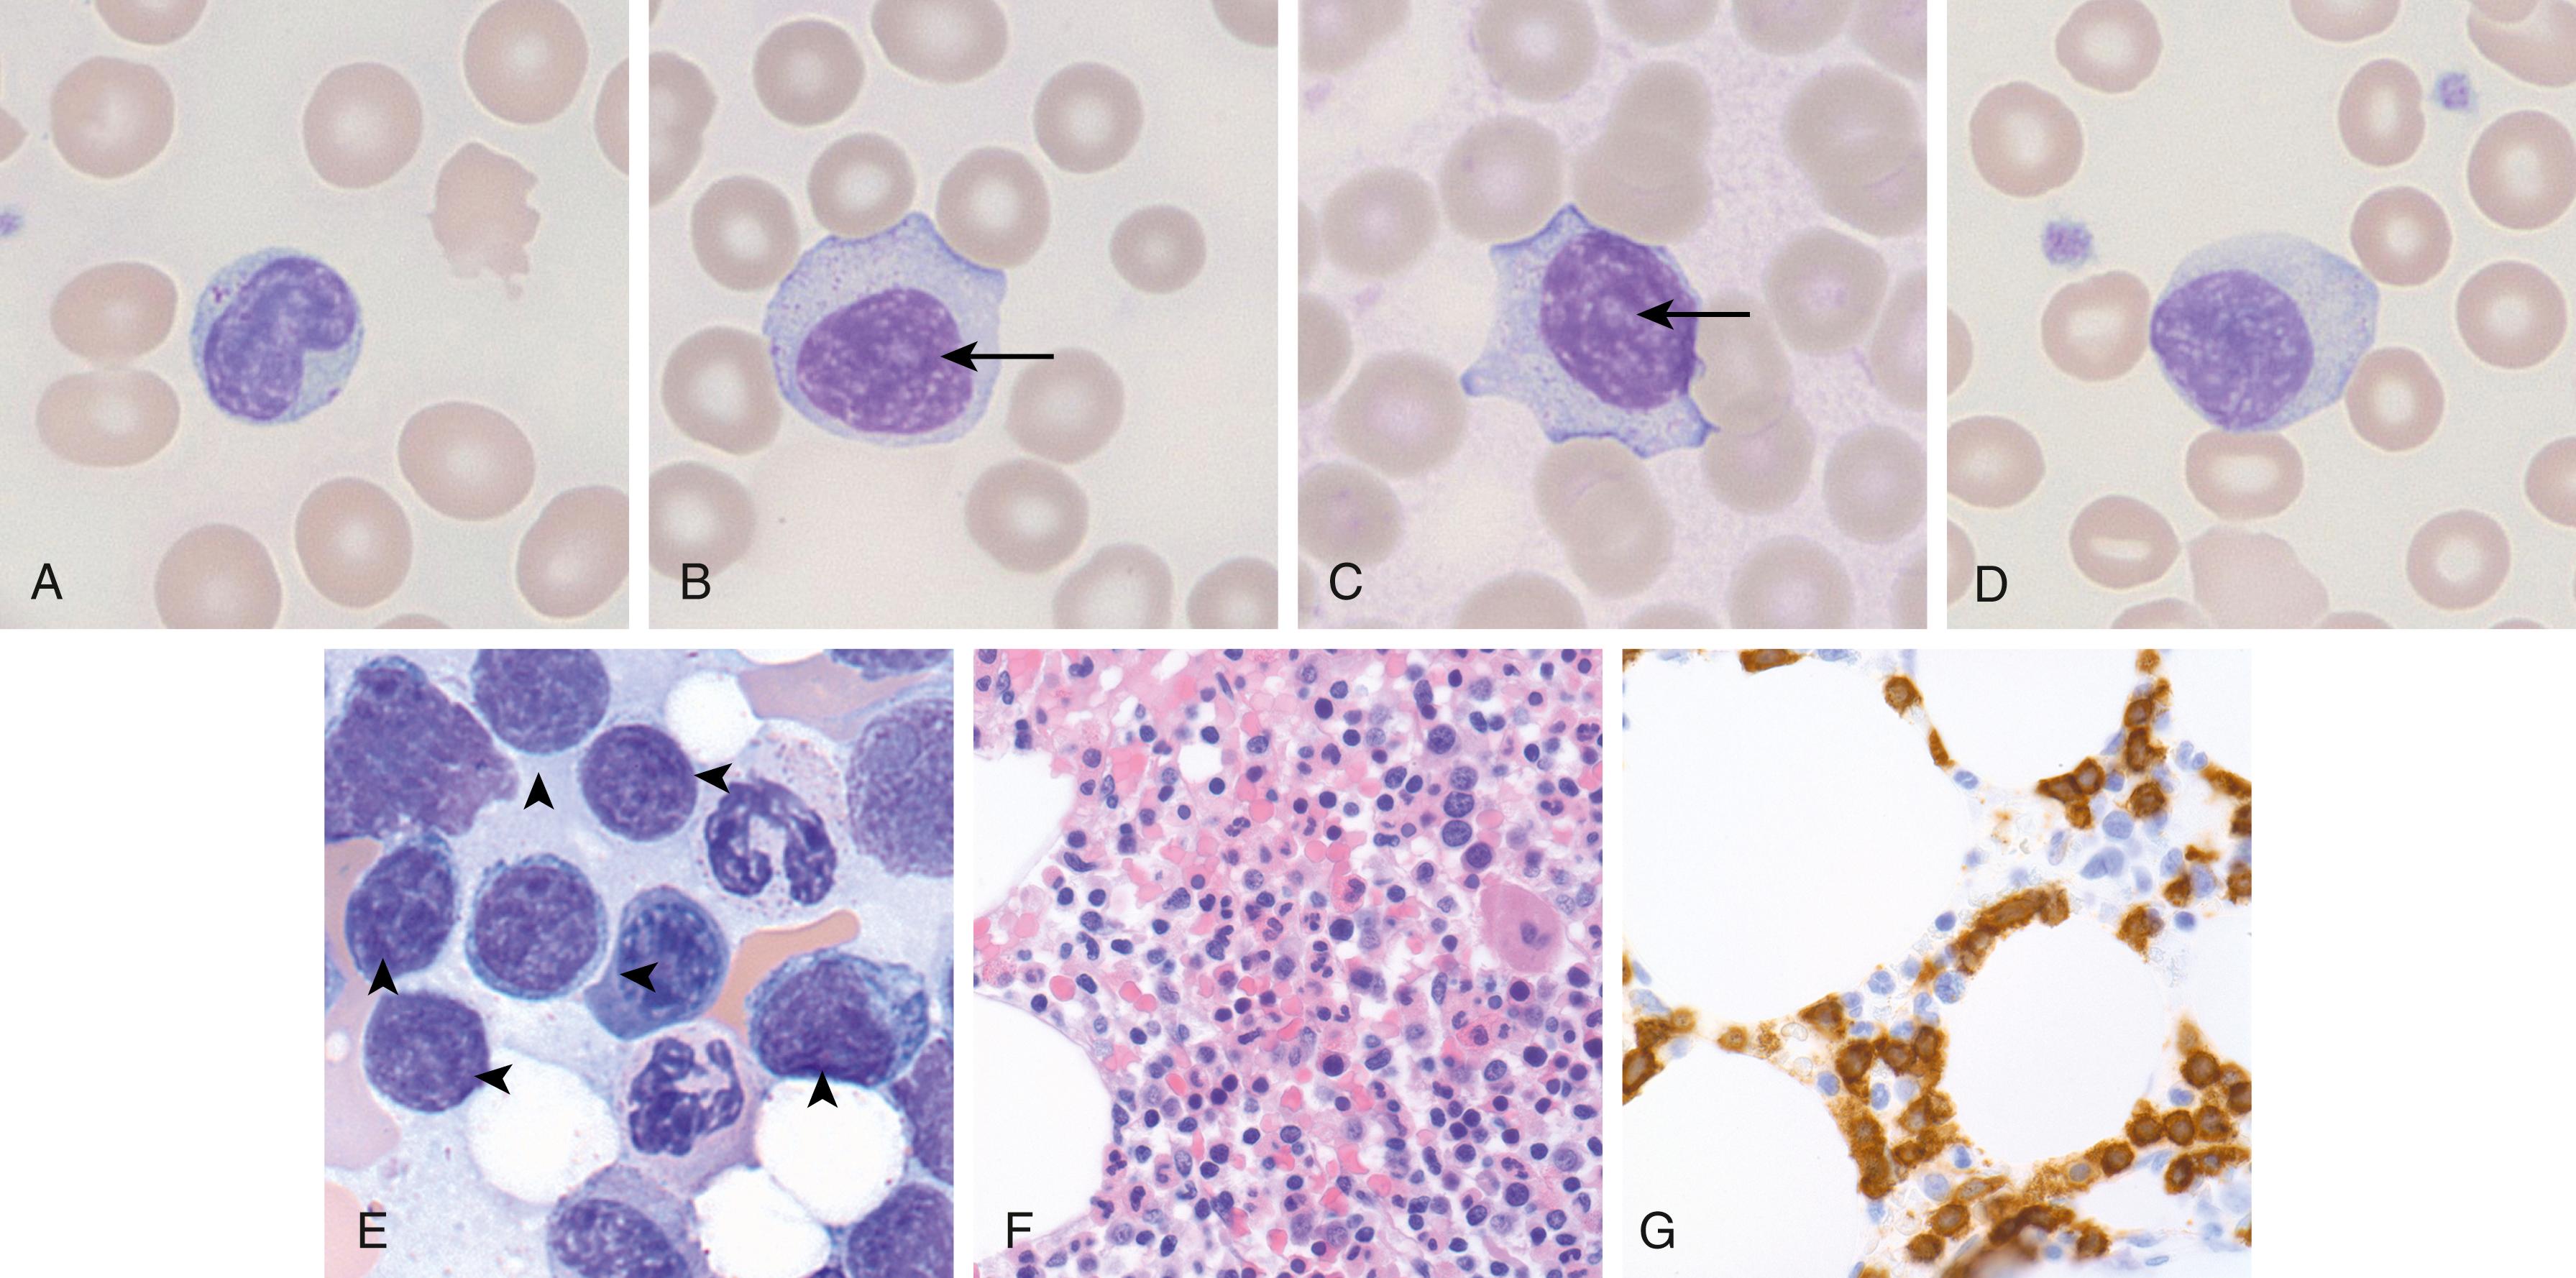 Fig. 13.2, T-cell large granular lymphocytic (T-LGL) leukemia. (A–D) Images of large LGLs with large nuclei with moderately condensed nuclear chromatin. Some nuclei show visible nucleoli ( arrows ); cytoplasmic azurophilic granules of varying prominence are seen in all cases. (E) LGLs in a marrow aspirate that are medium to larger in size with minimal amounts of cytoplasm ( arrowheads ); cytoplasmic granules are typically difficult to see in LGLs in bone marrow aspirate specimens. (F) Bone marrow core biopsy specimen where infiltration by LGLs is not easily apparent. (G) A CD8 immunohistochemical stain highlights numerous LGLs that form large clusters, some in a linear array consistent with a sinusoidal distribution.